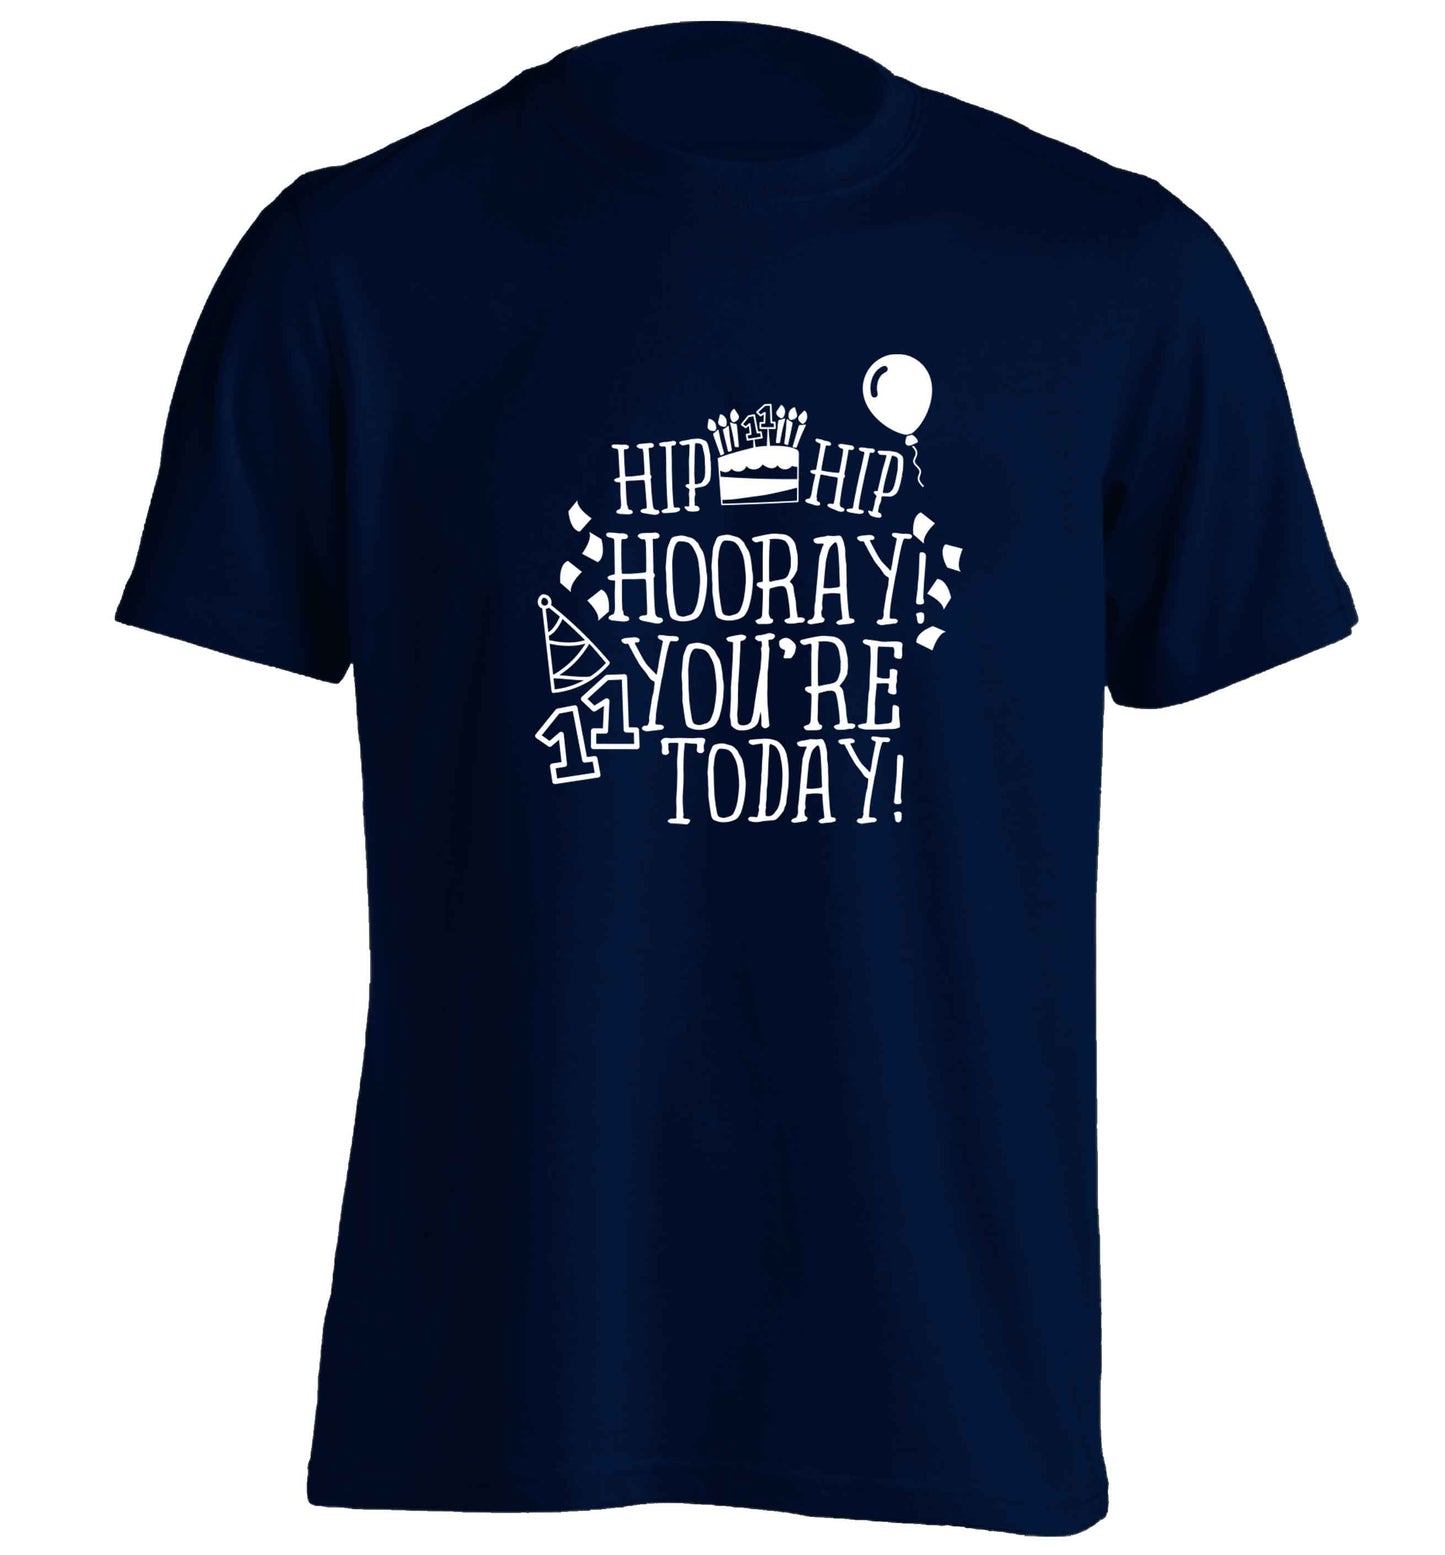 Hip hip hooray I you're eleven today! adults unisex navy Tshirt 2XL